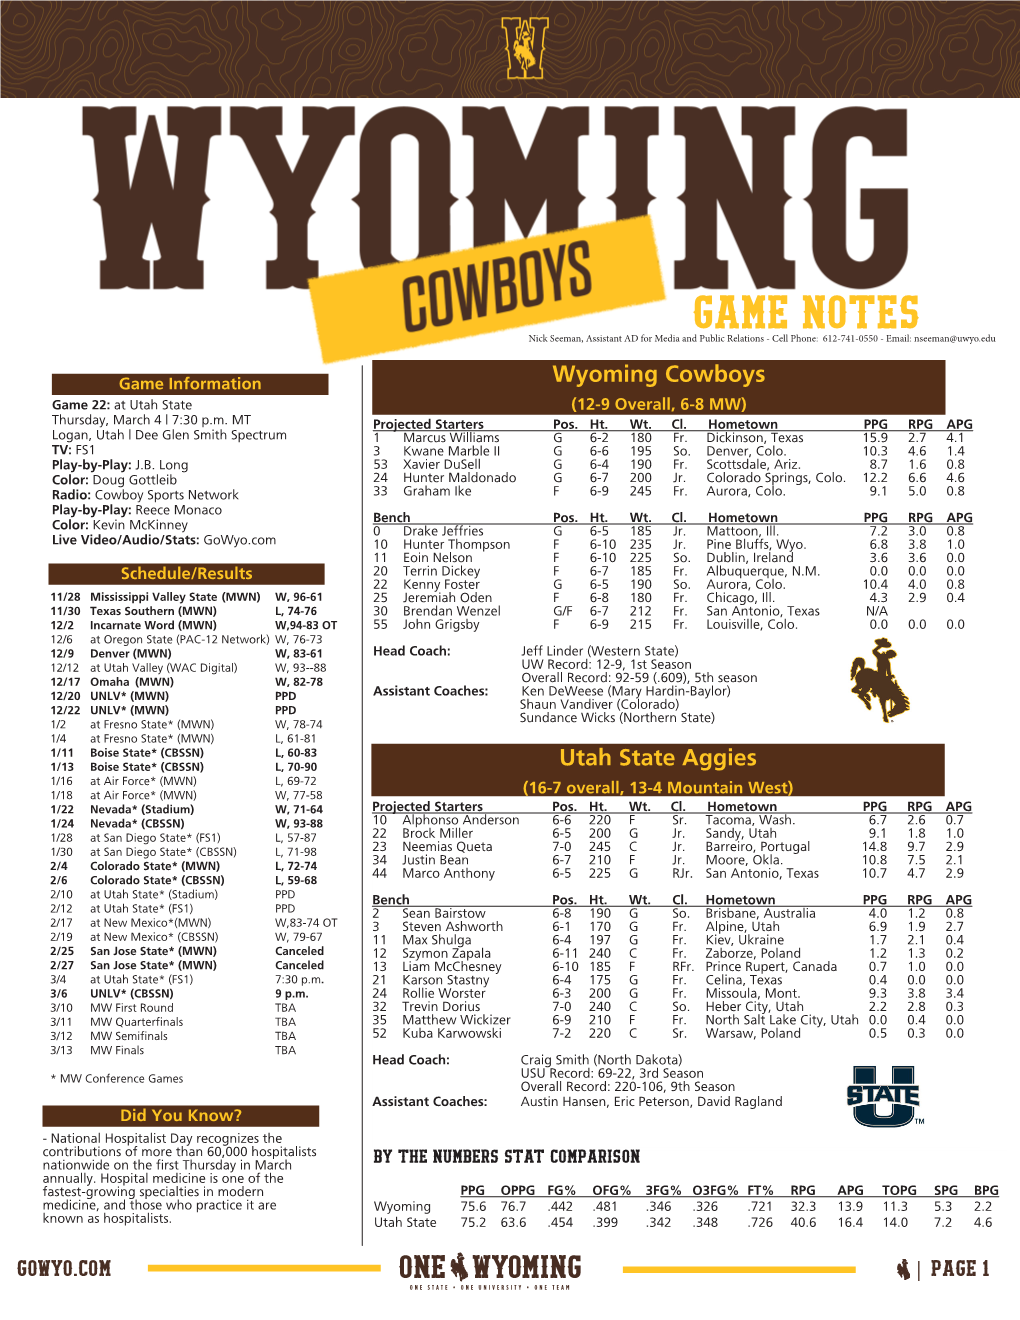 GAME NOTES Nick Seeman, Assistant AD for Media and Public Relations - Cell Phone: 612-741-0550 - Email: Nseeman@Uwyo.Edu